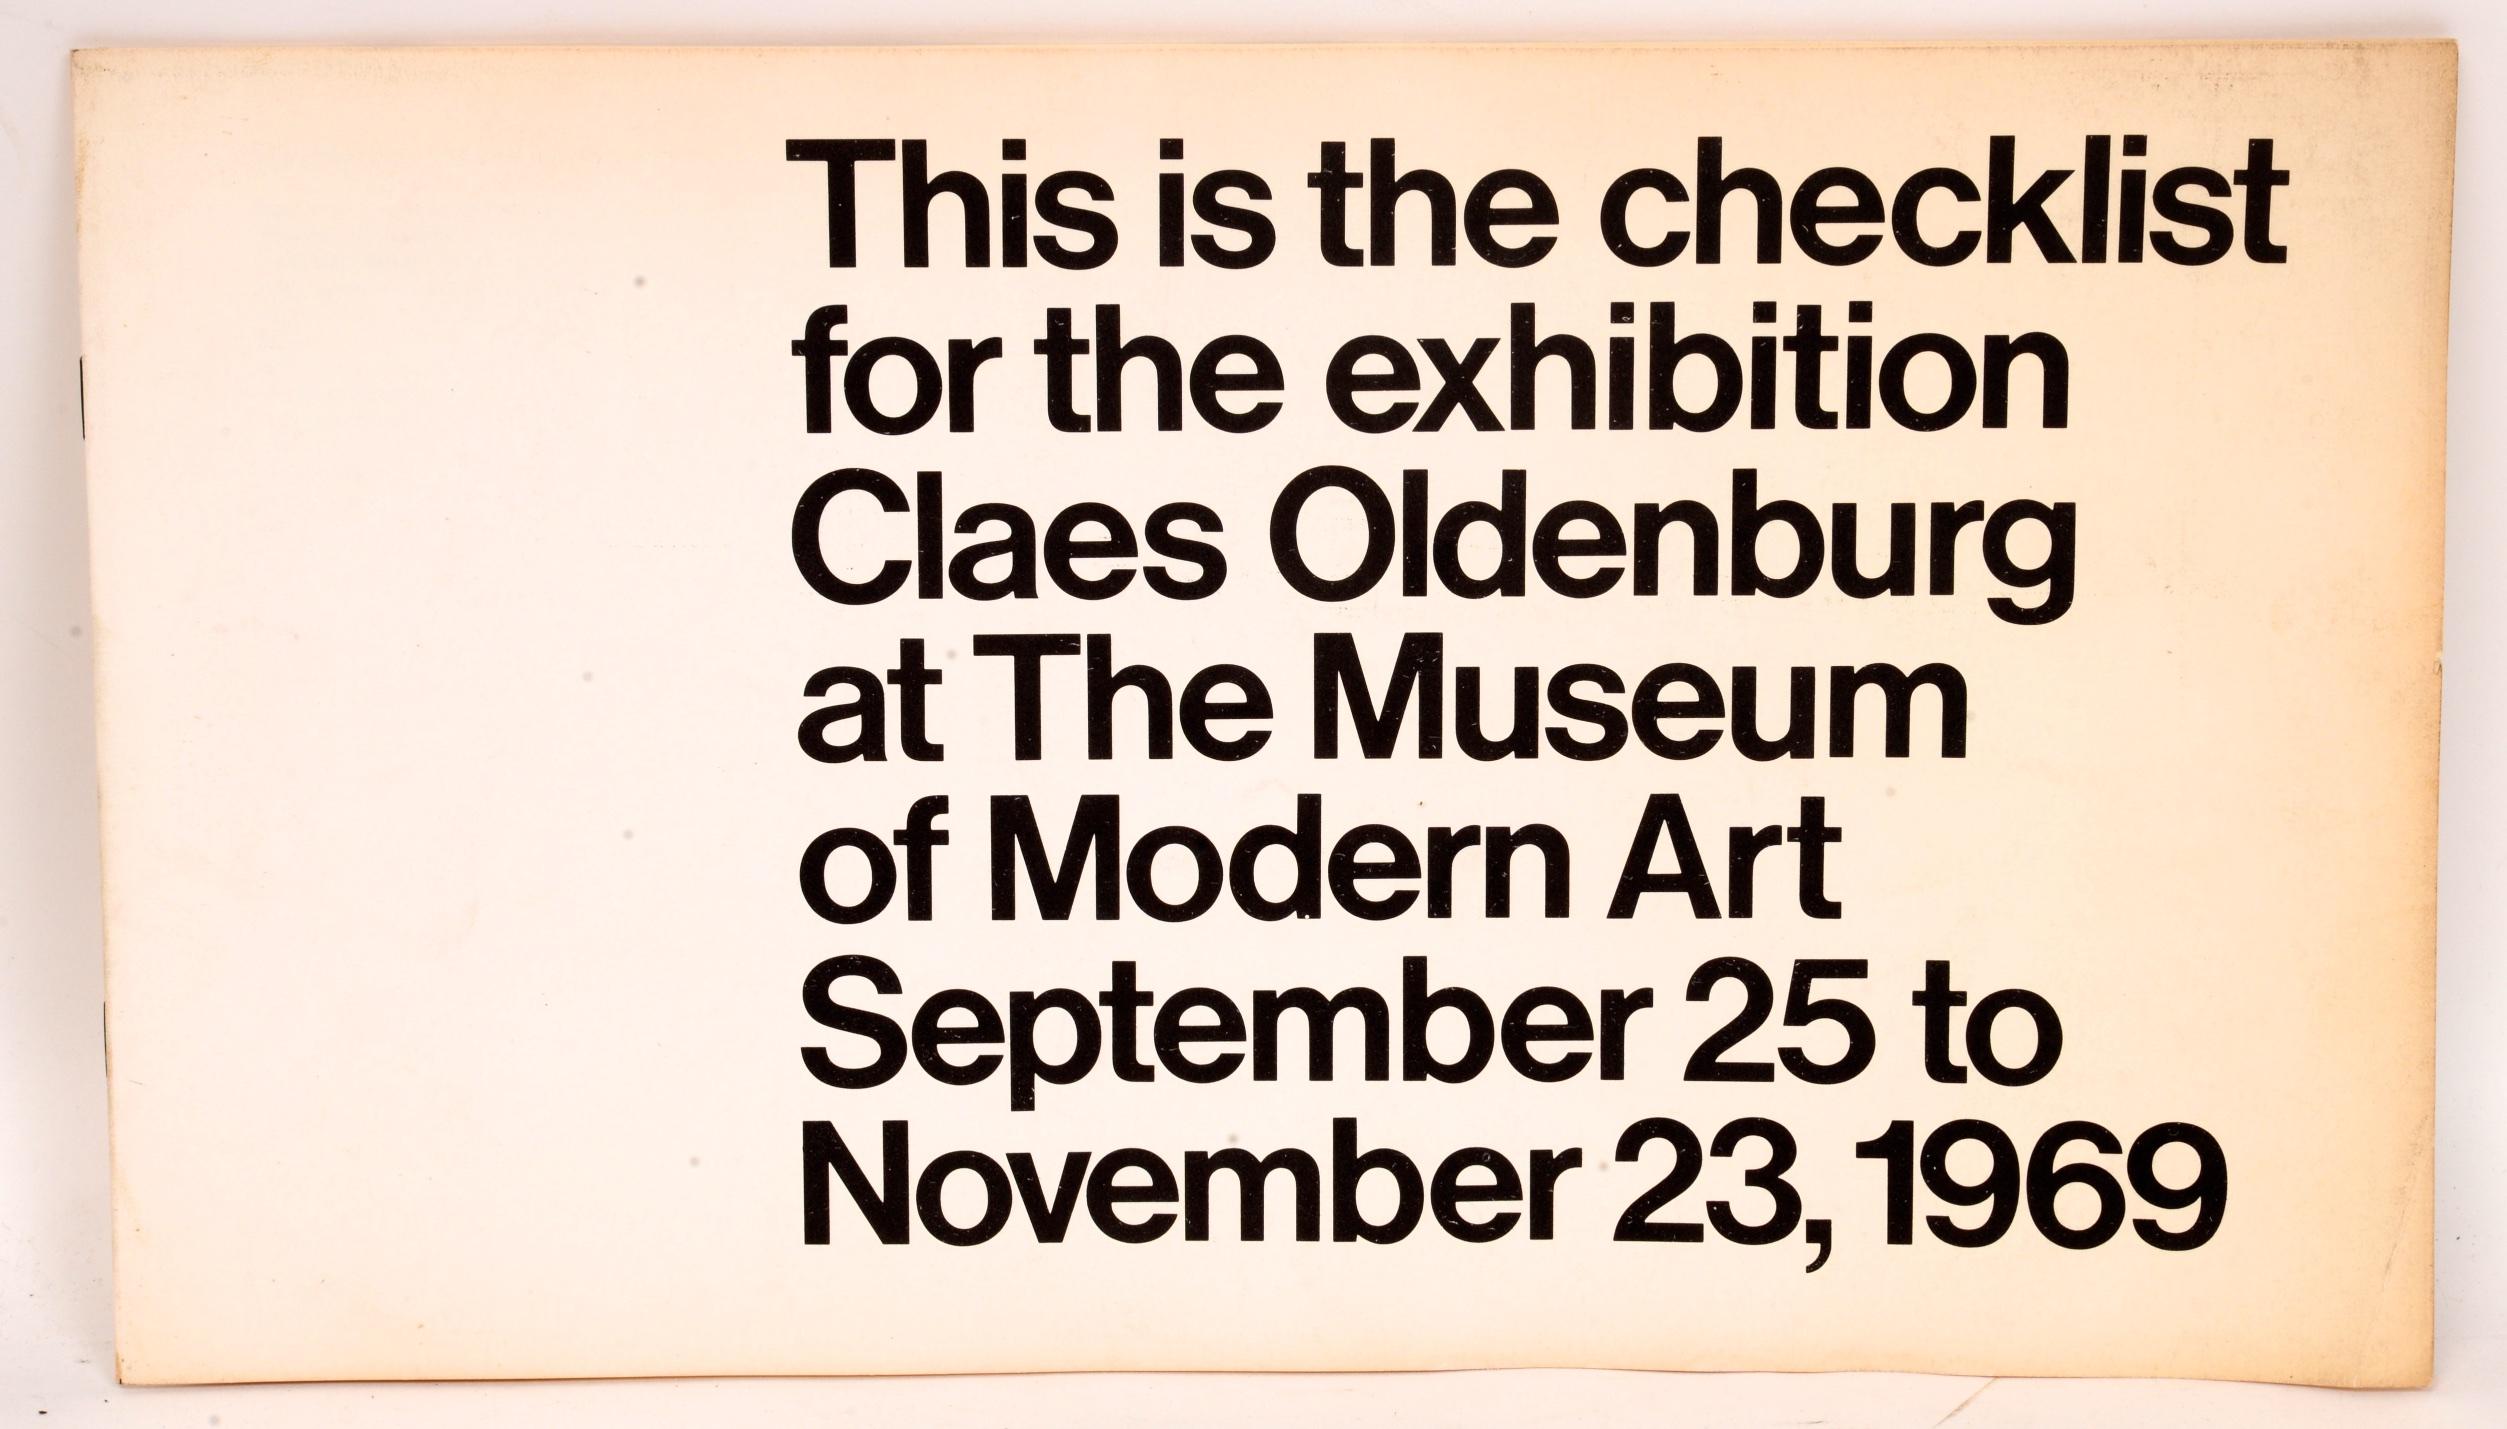 Claes Oldenburg by Barbara Rose. Museum of Modern Art, New York, 1970. First edition softcover with 221 pages. B&W and color illustrations. Original flexible plastic cover, an unusual sculptural design enhanced further by the pink decorated